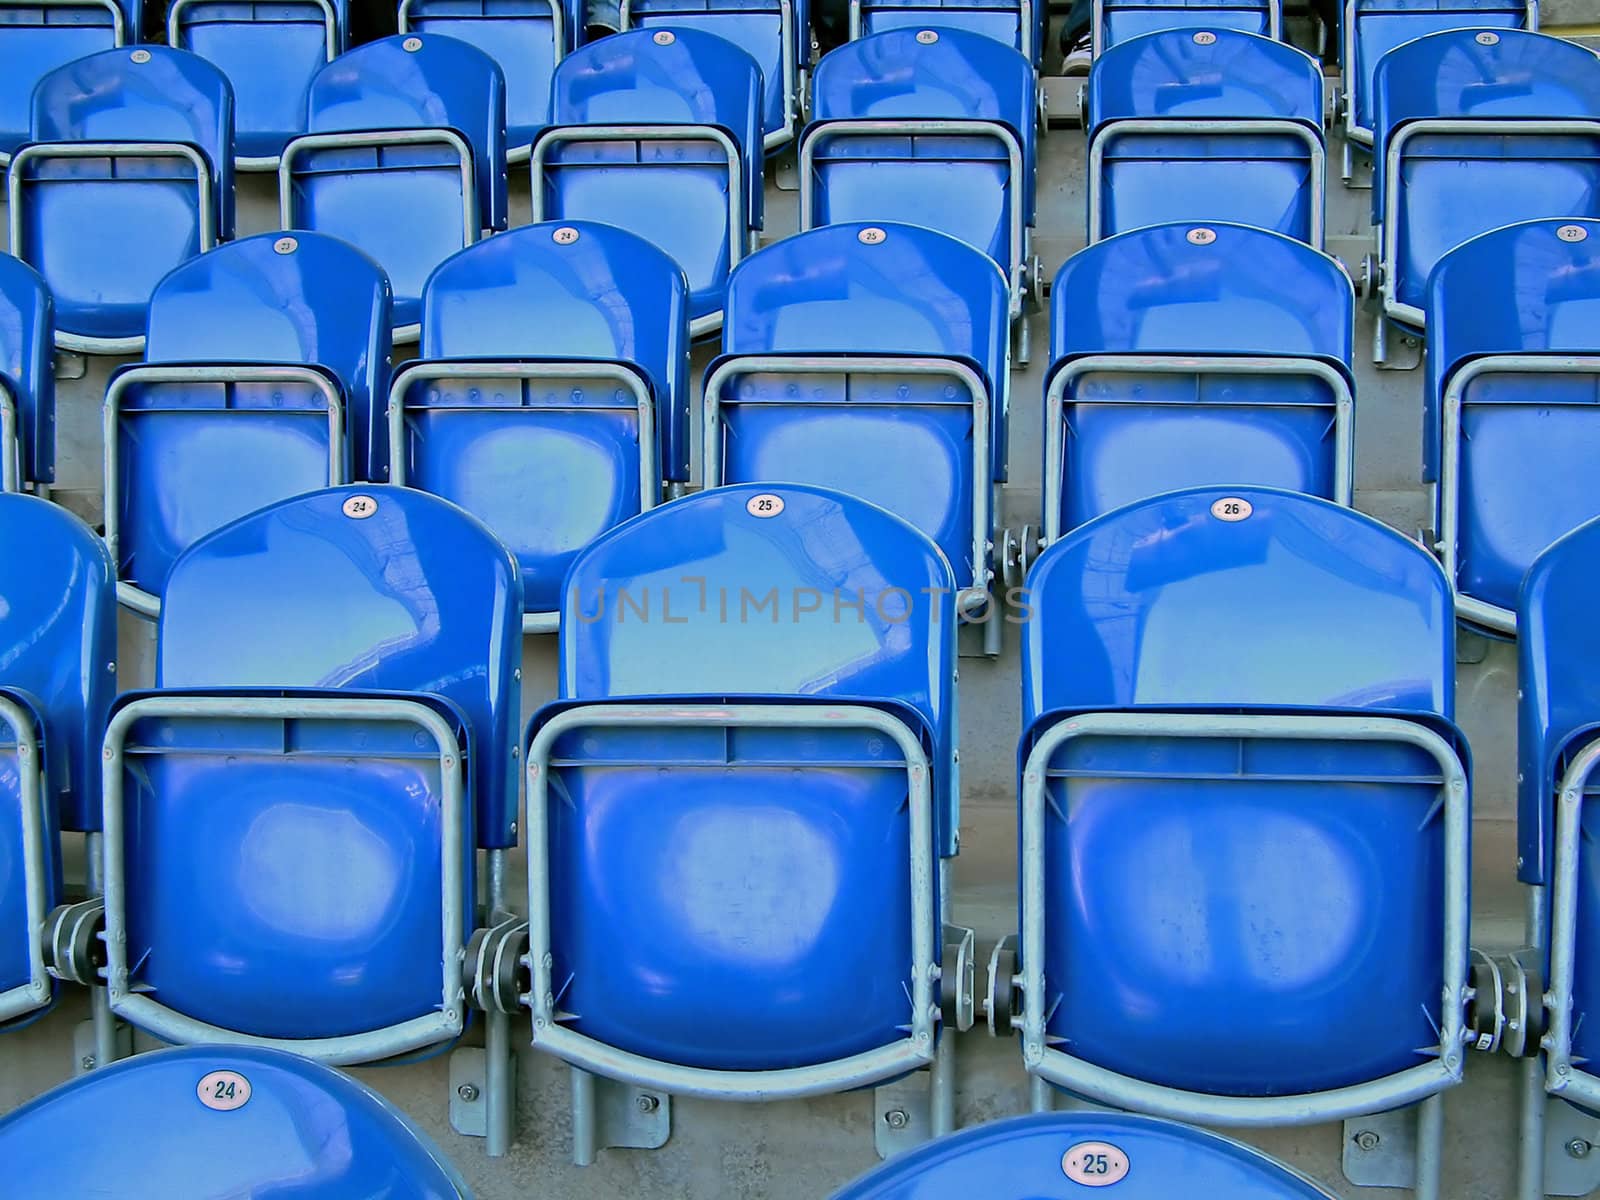 Photographic image of plastic folding chairs on sports arena.